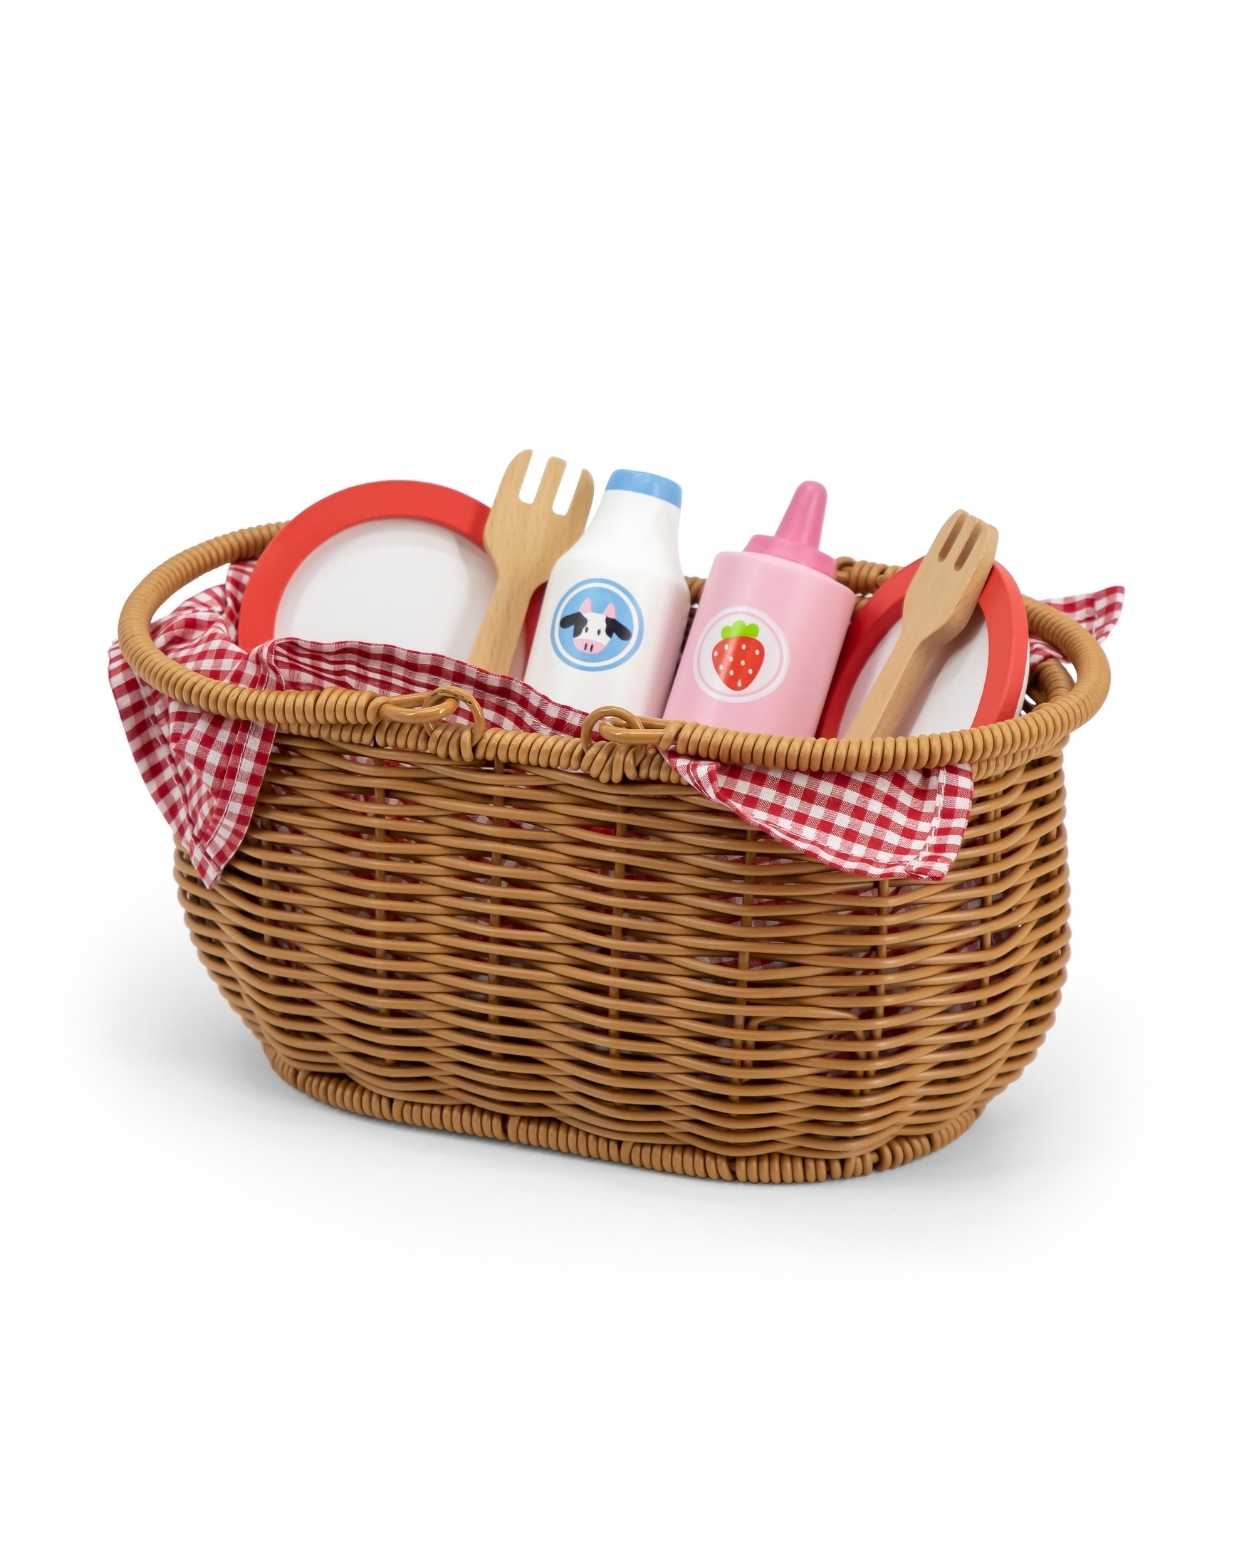 play food is  n the rattan Picnic Basket  for kids